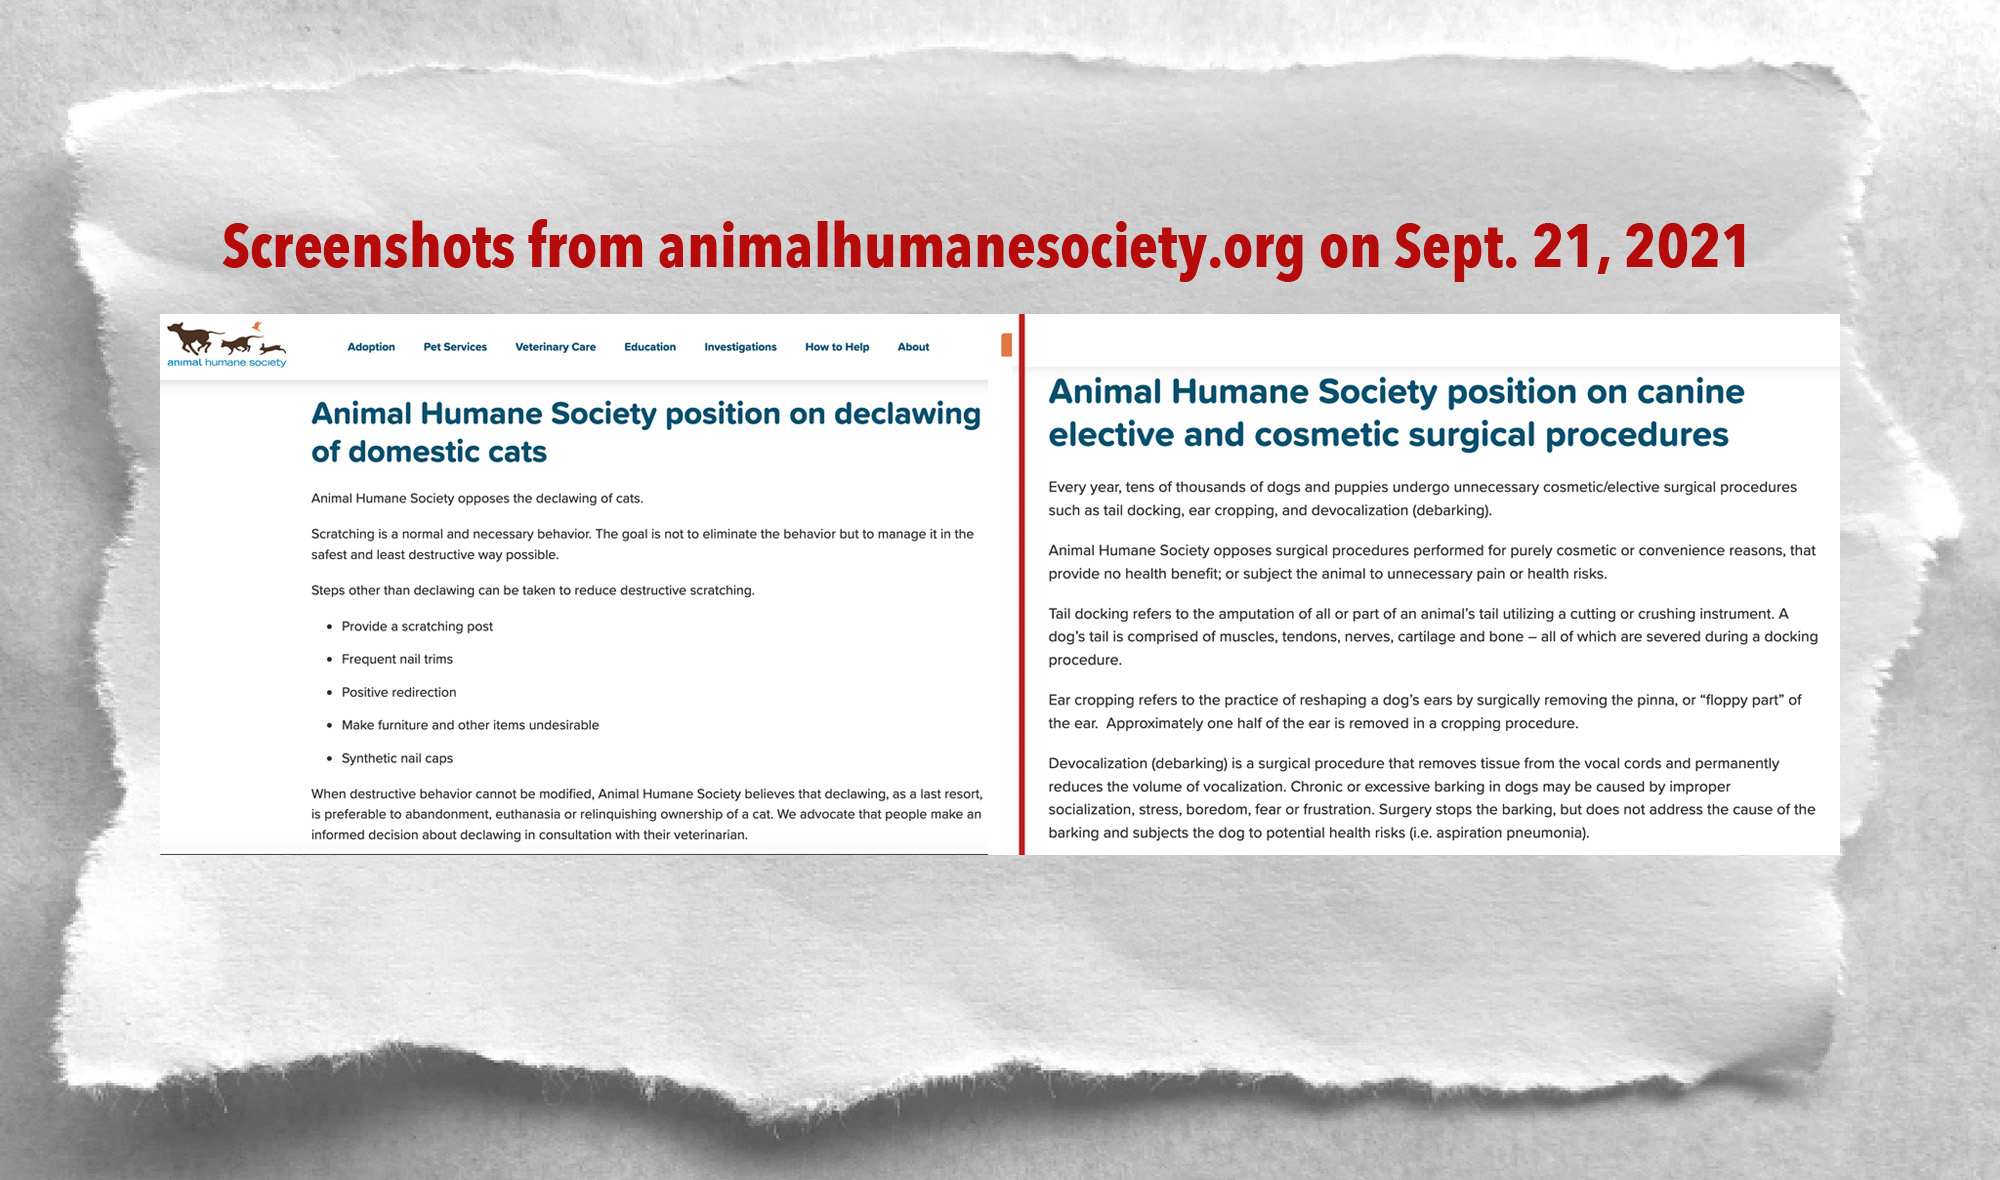 Does The Animal Humane Society Like Dogs More Than Cats? - City the ...